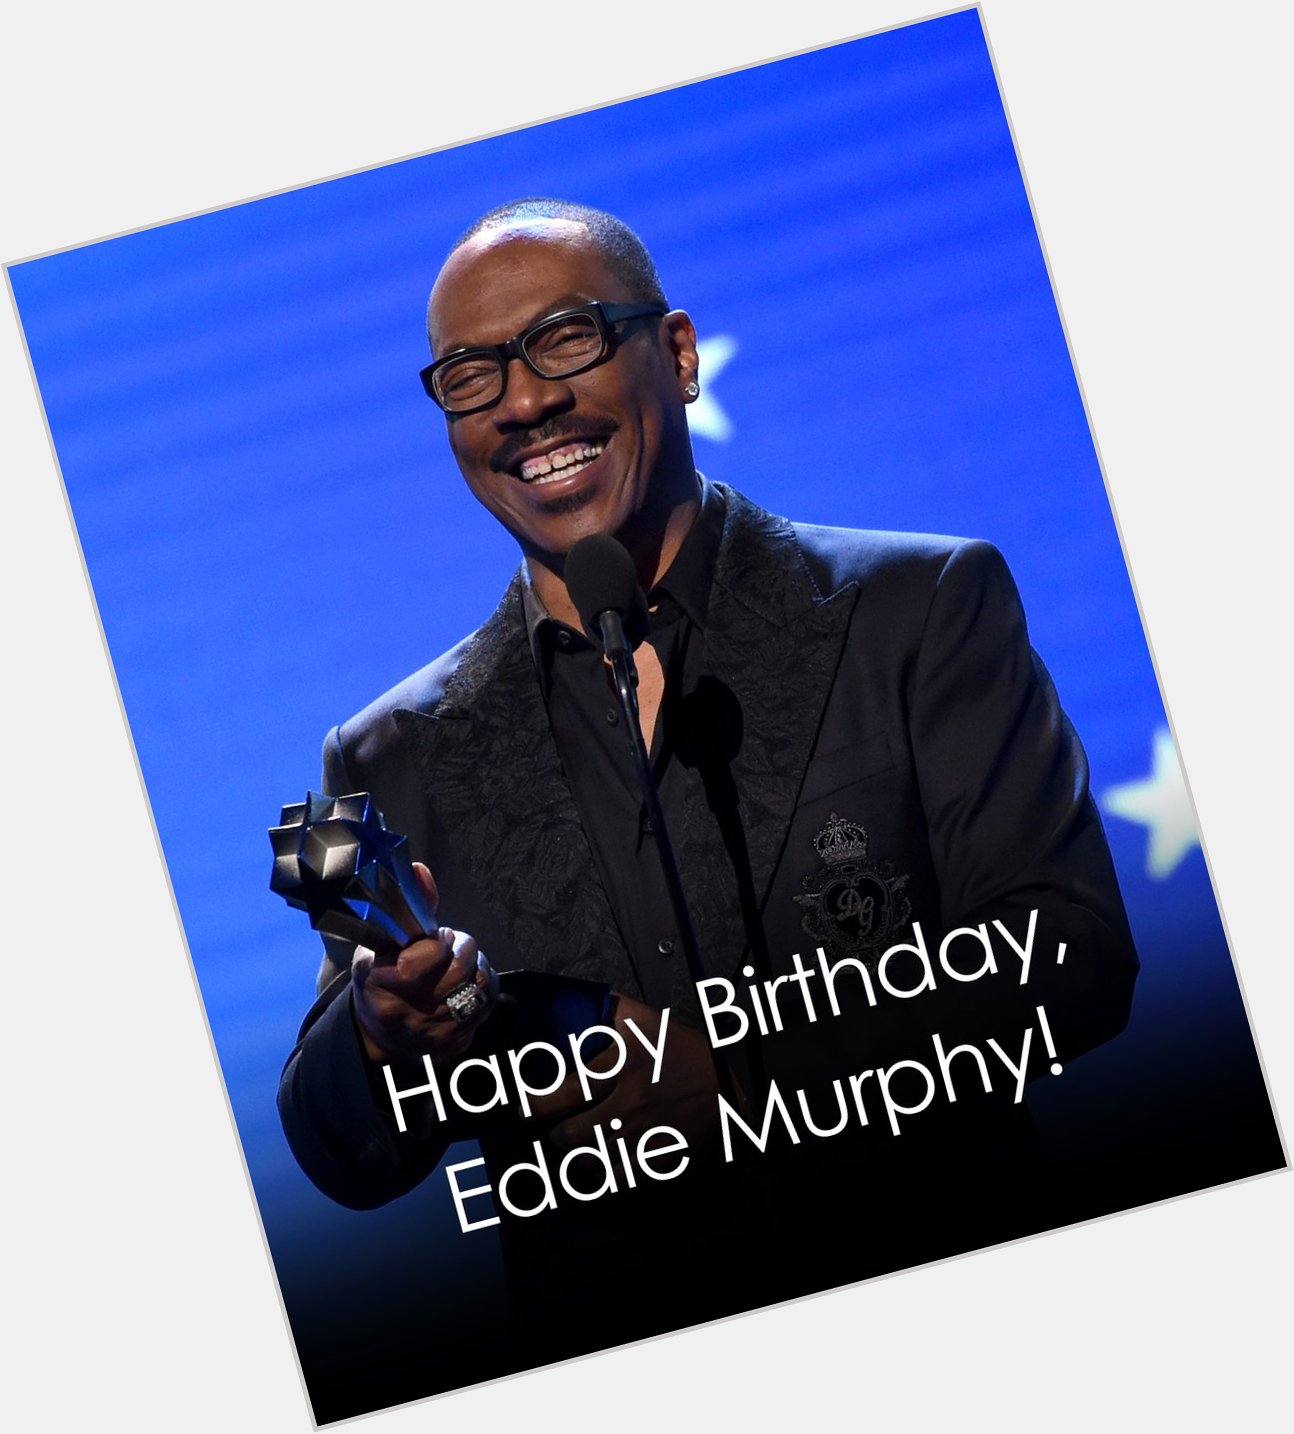 HAPPY BIRTHDAY, EDDIE MURPHY! The actor-comedian is turning 61 years old today.  